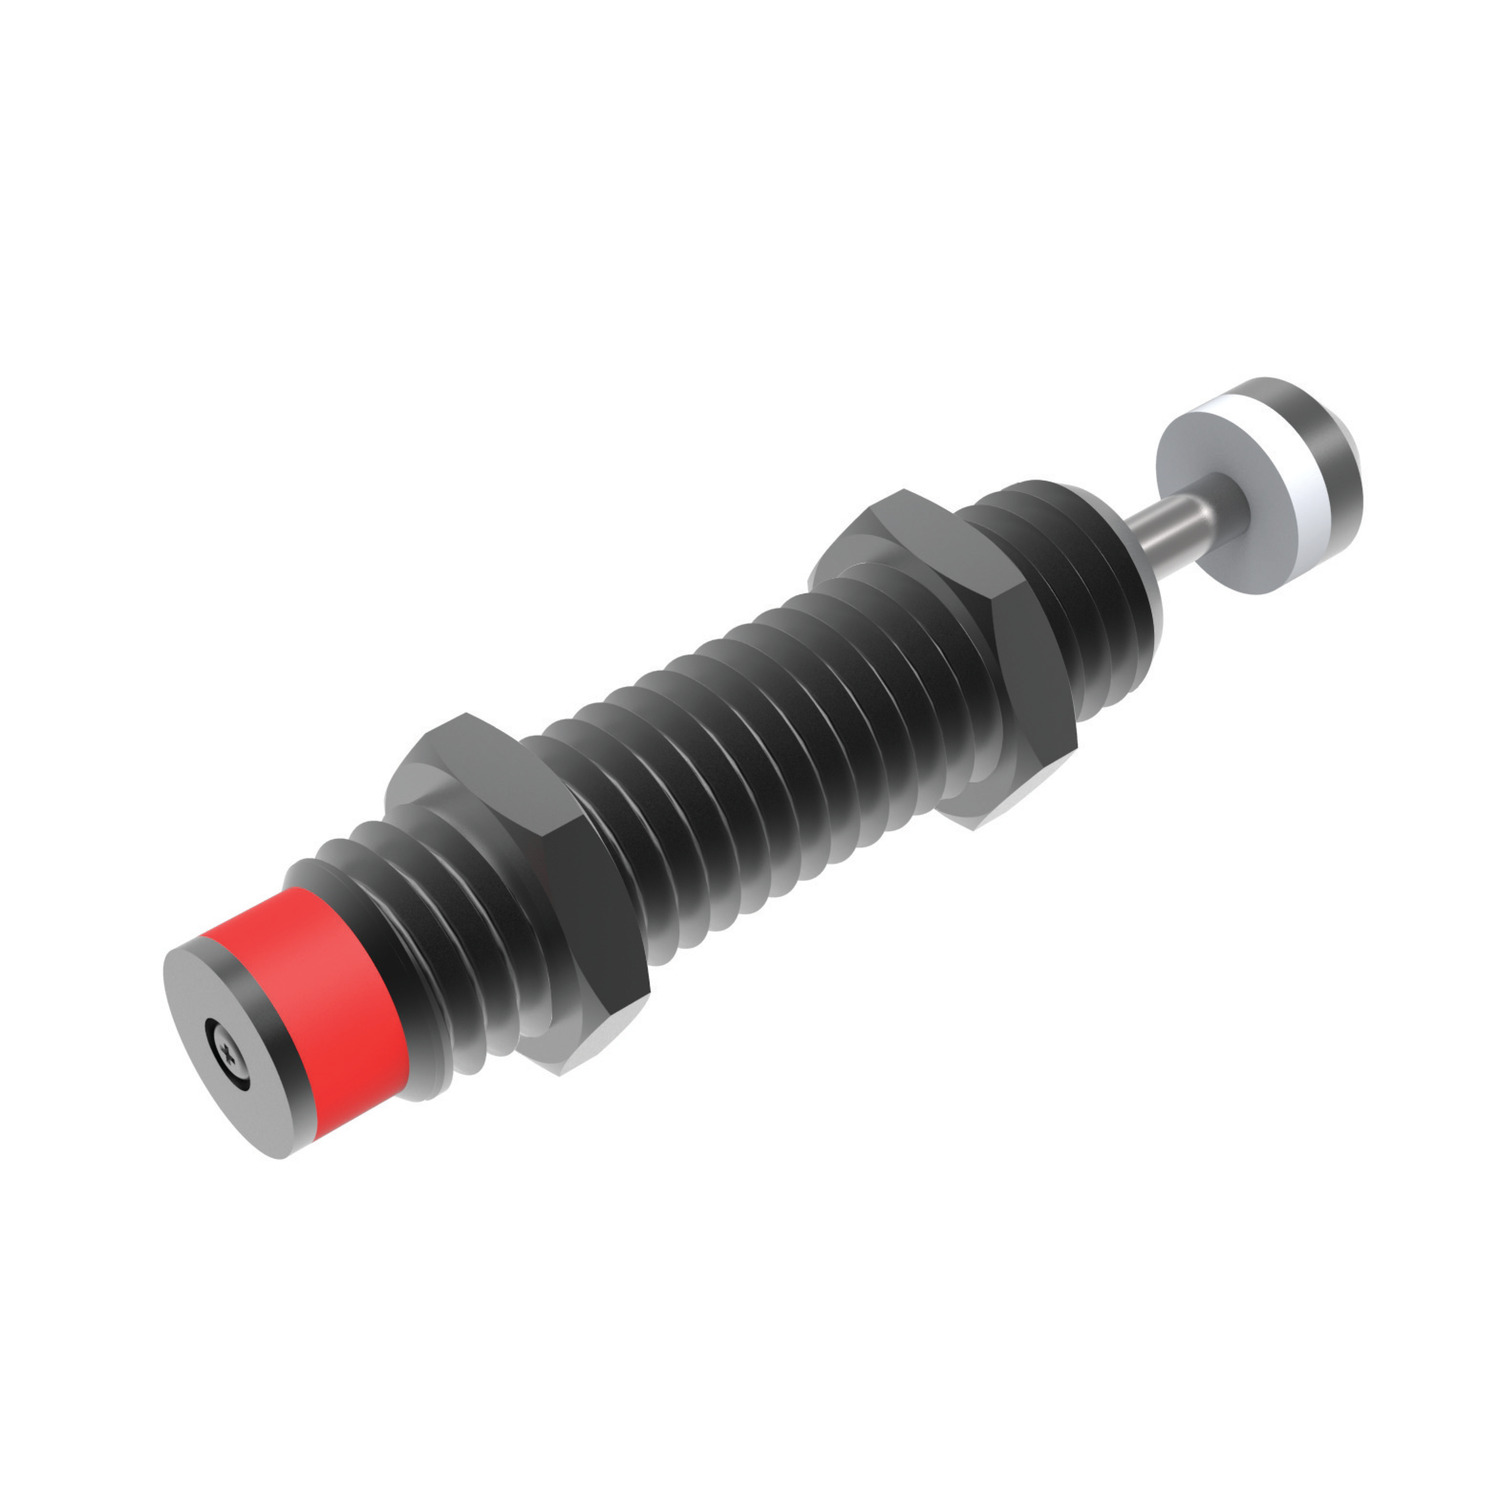 Product 68001, Minature Shock Absorbers, Self Compensating M8 - M12, non-adjustable / 